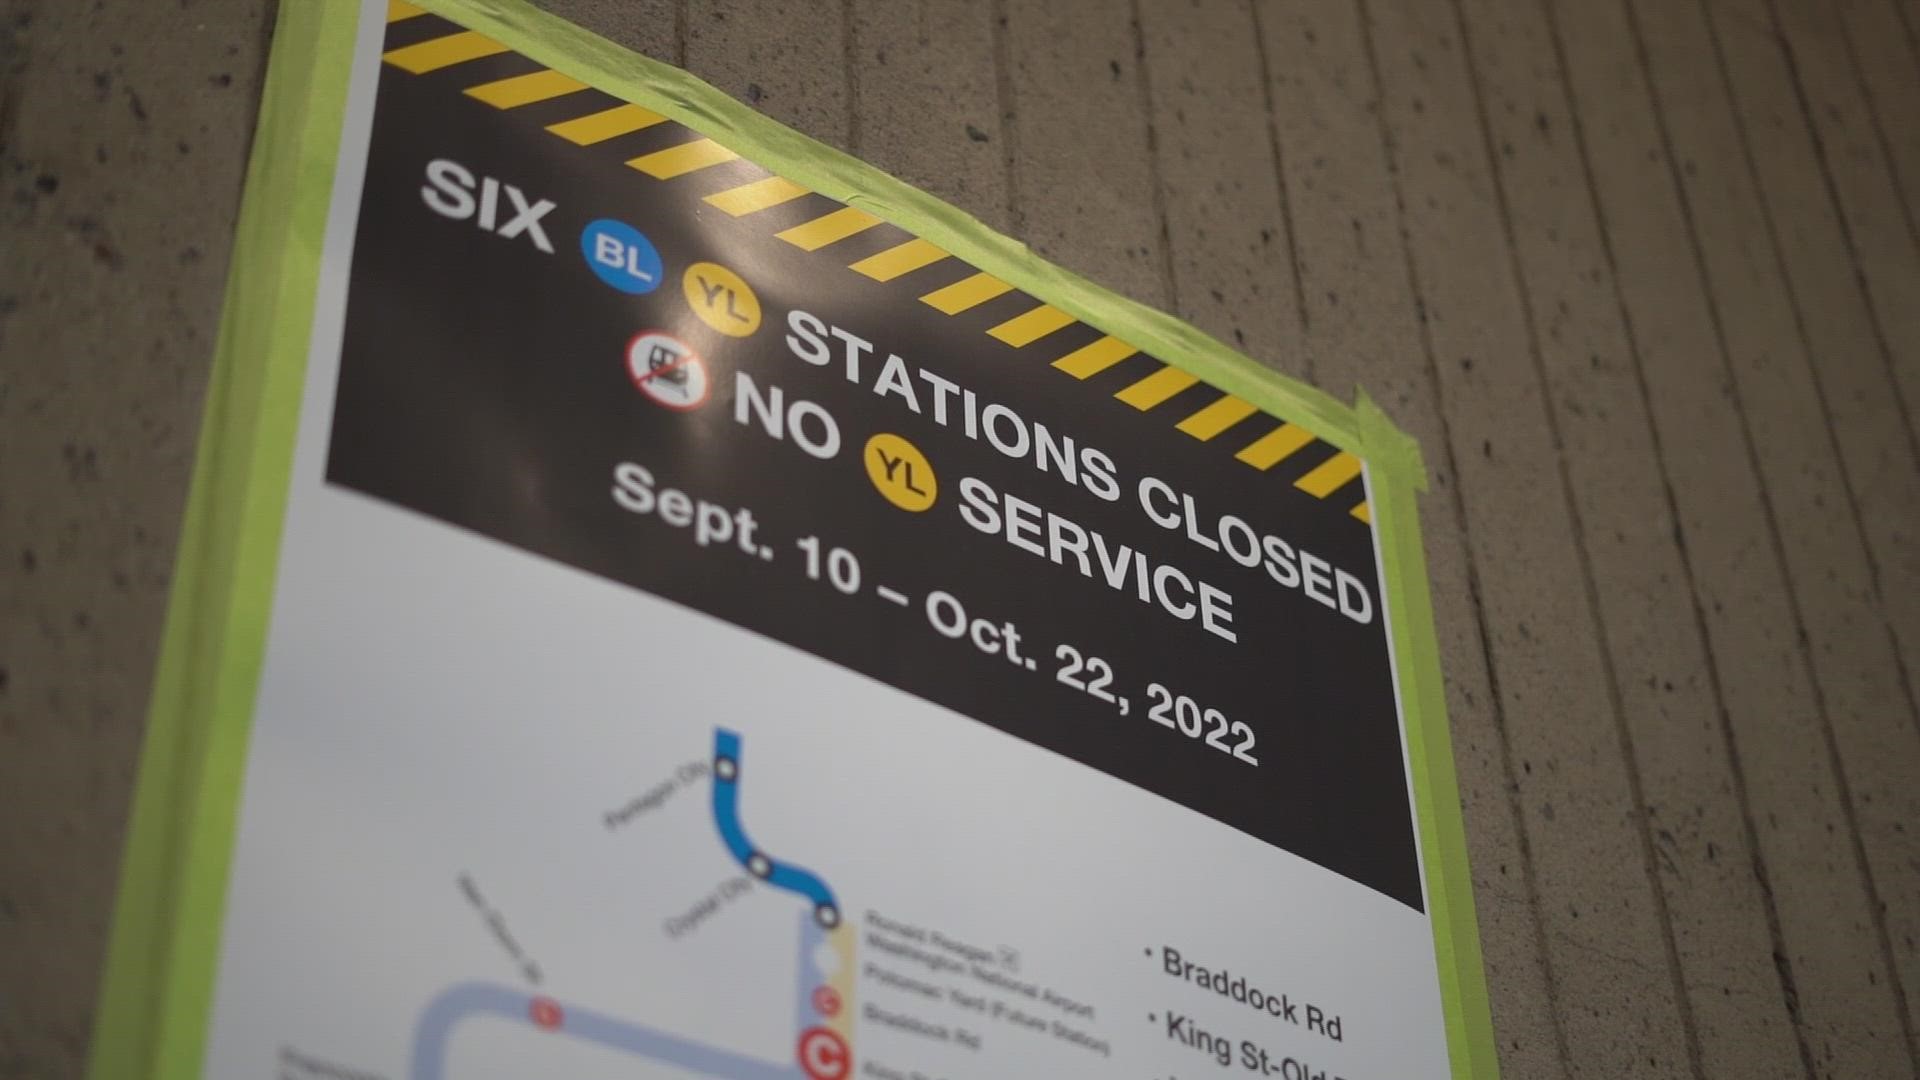 The major construction will shut down Metro stops south of Reagan National Airport for six weeks.